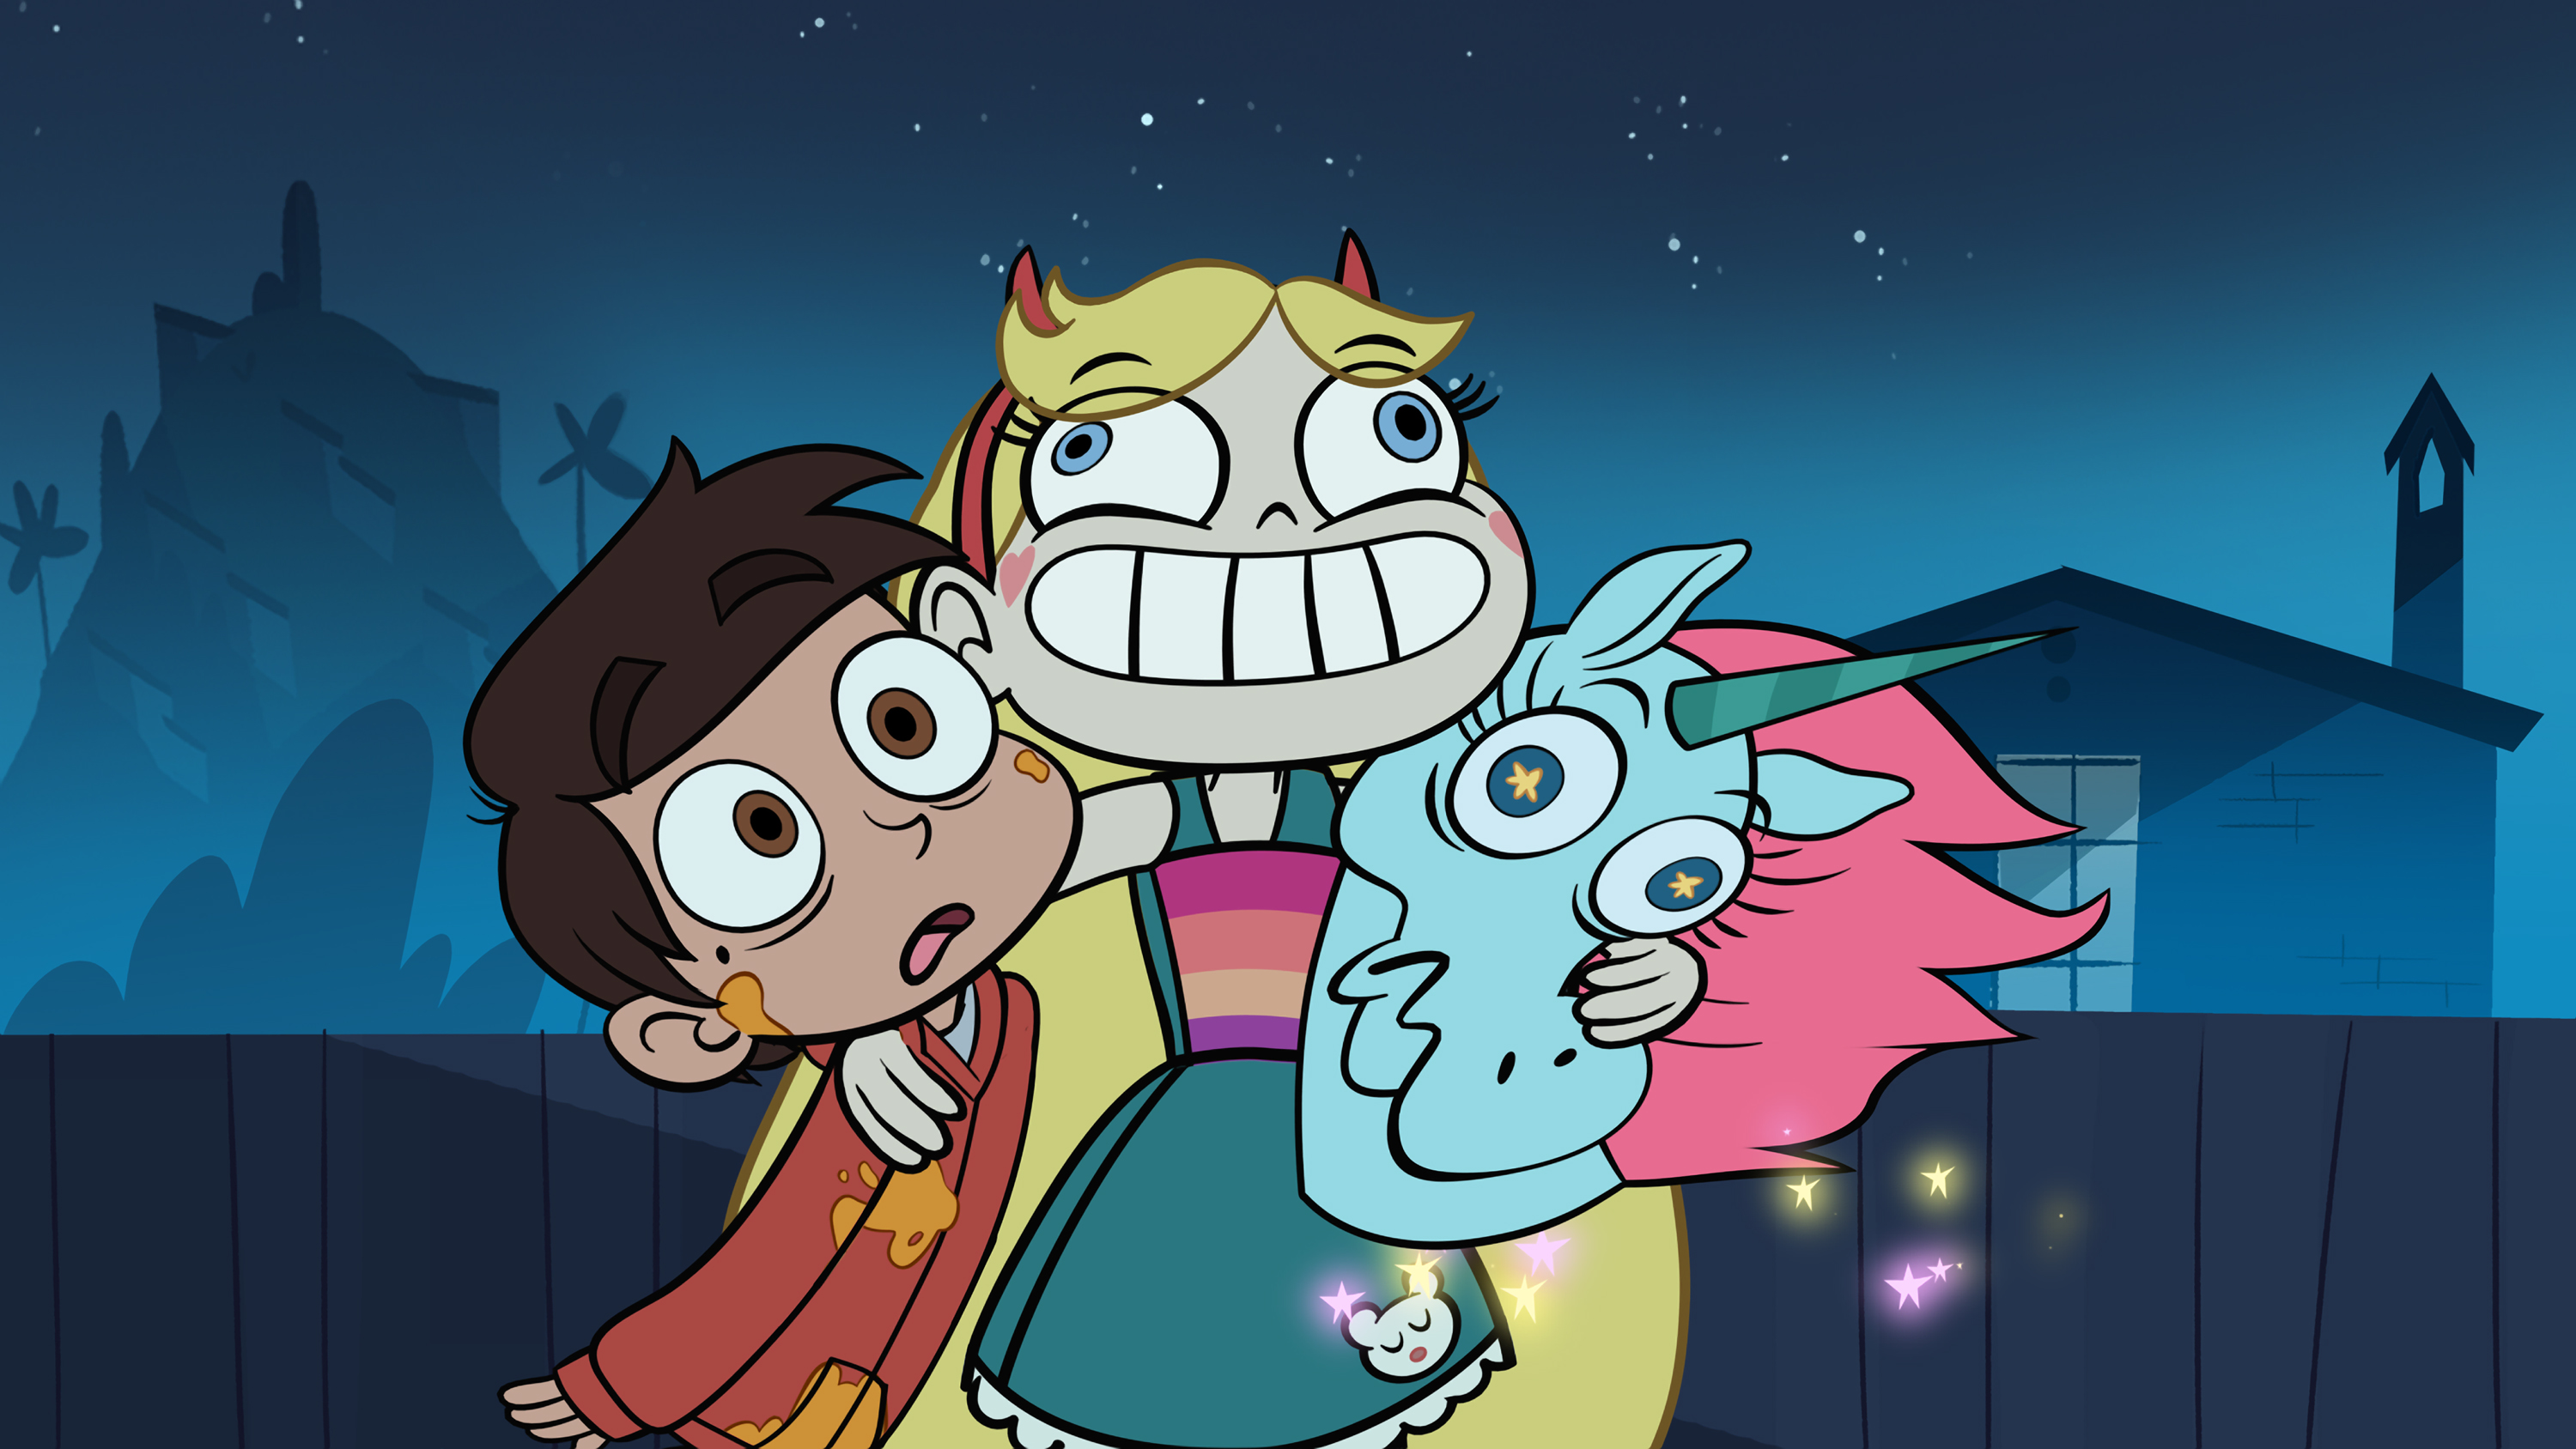 Star VS. The Forces Of Evil wallpapers.